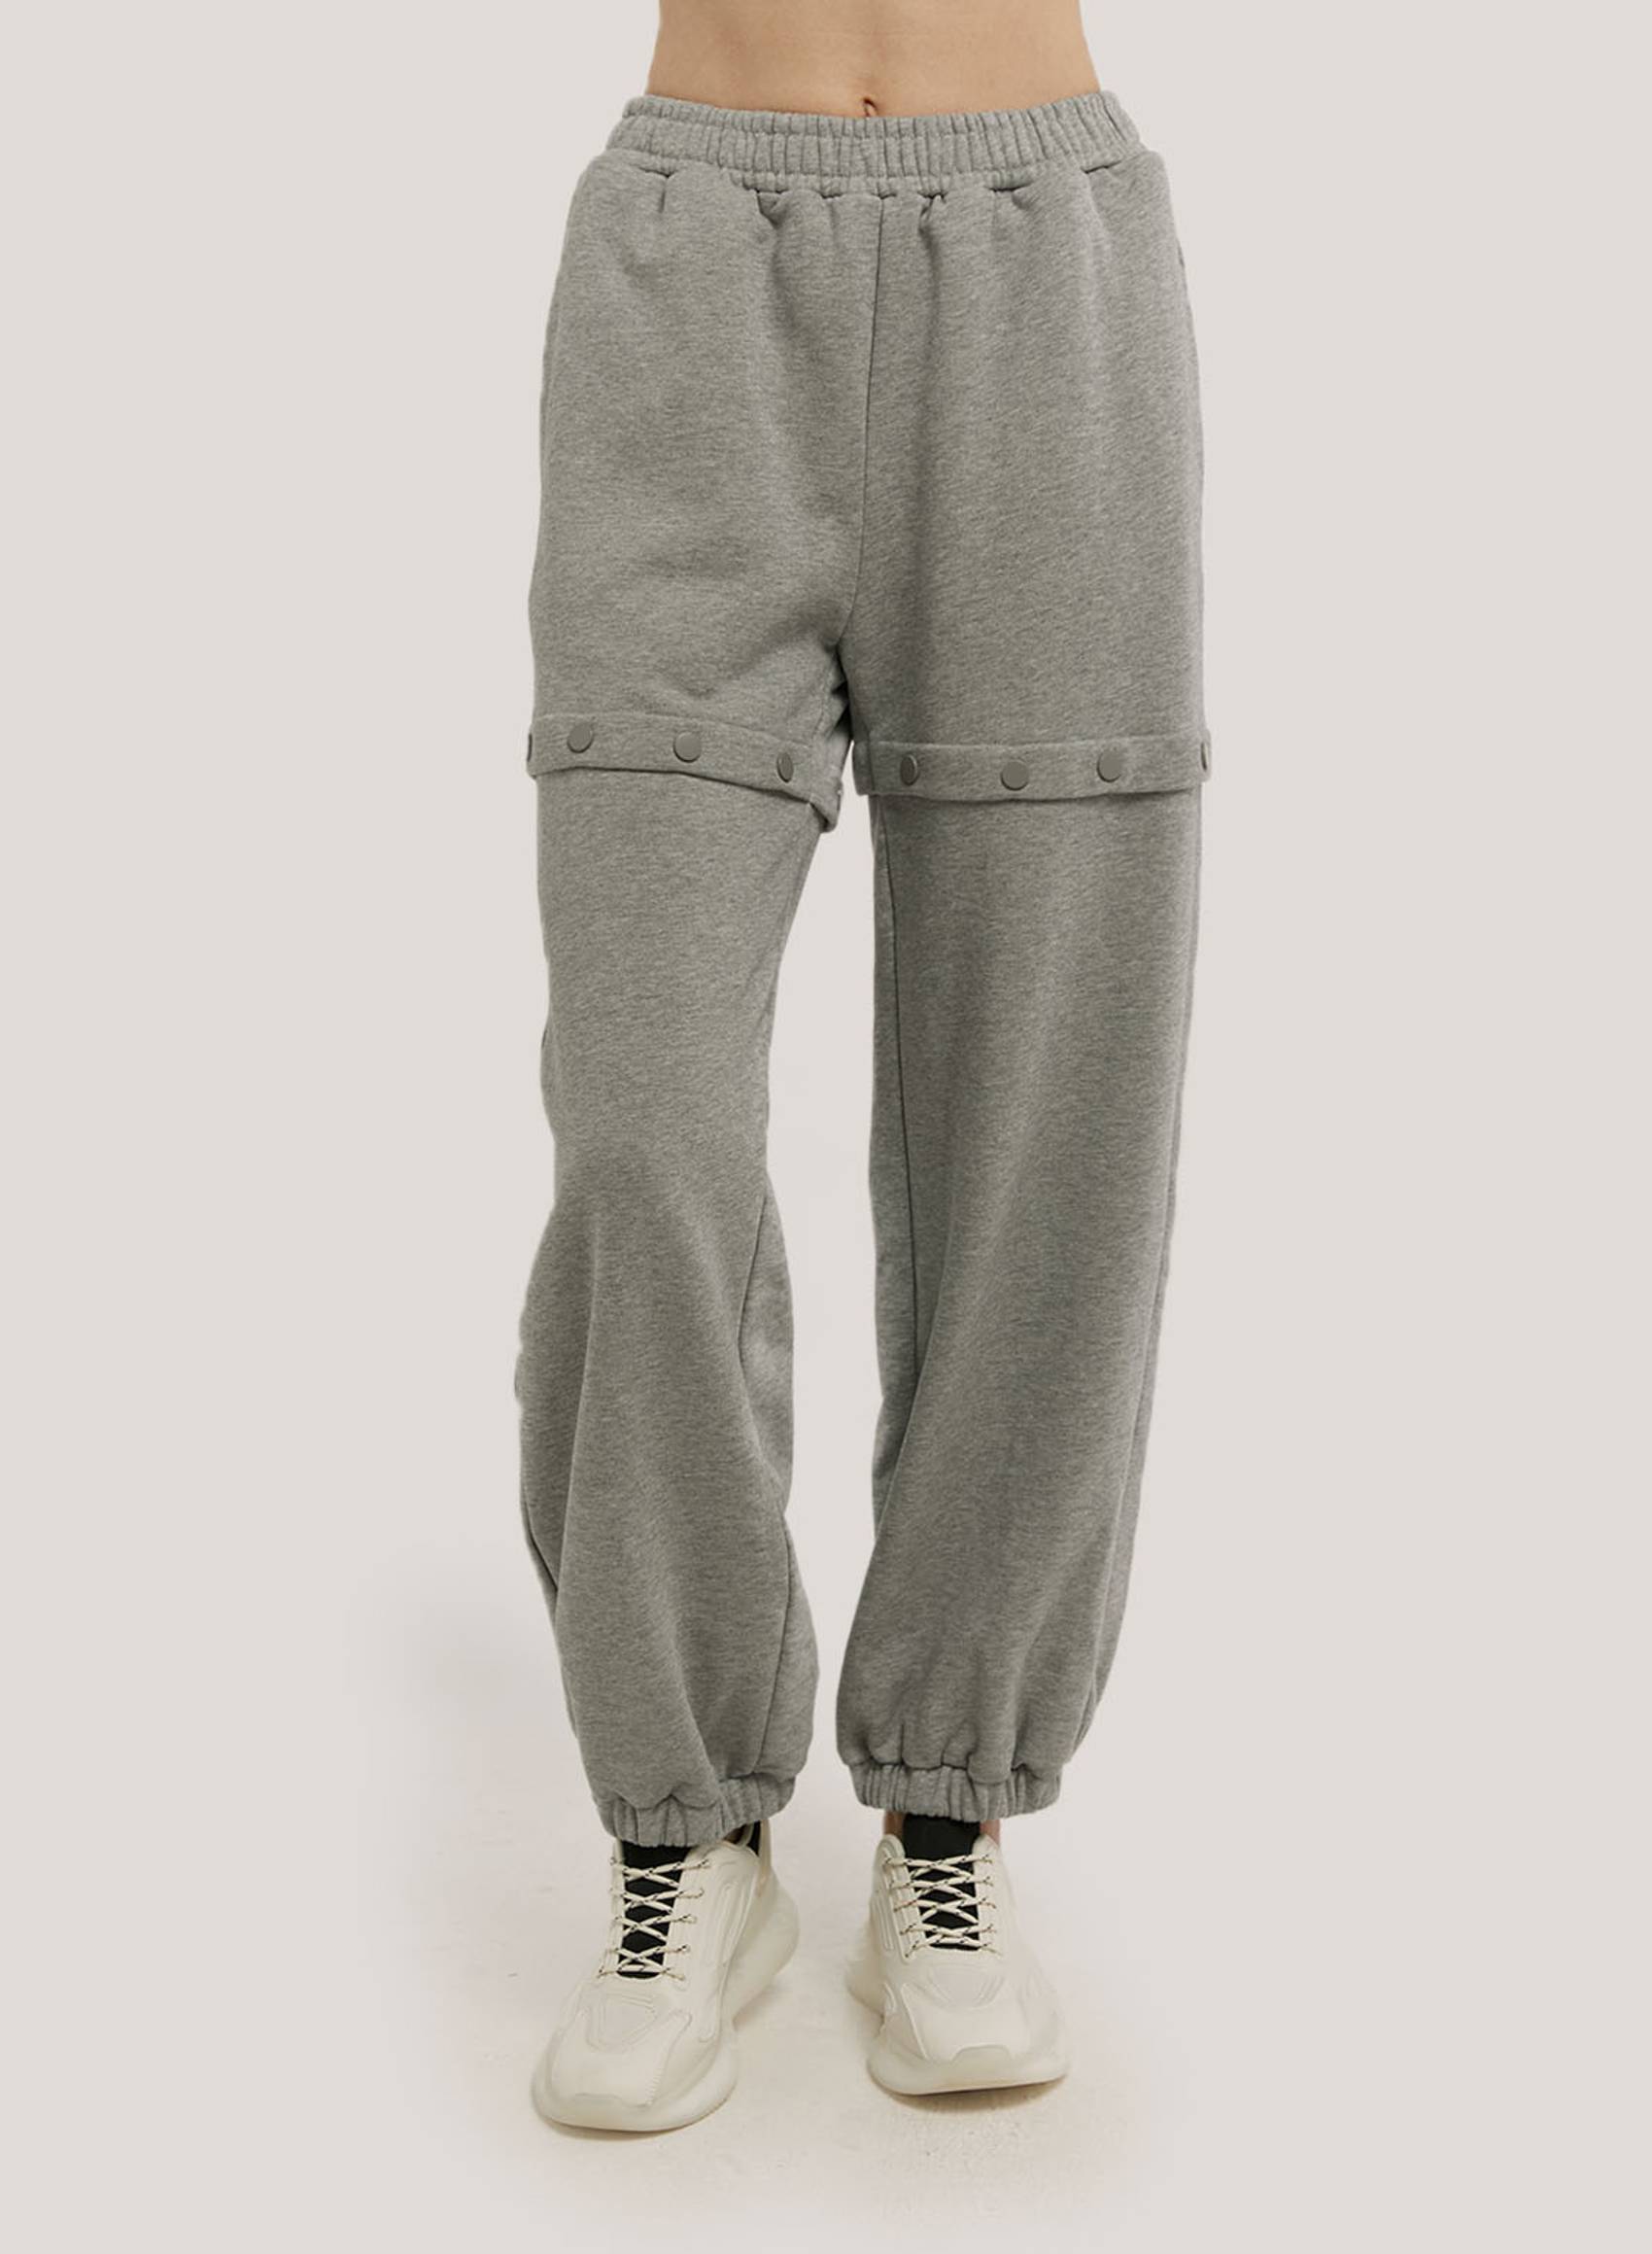 High-Waisted Sweatpants - 100% Cotton Track Pants - Gentle Herd